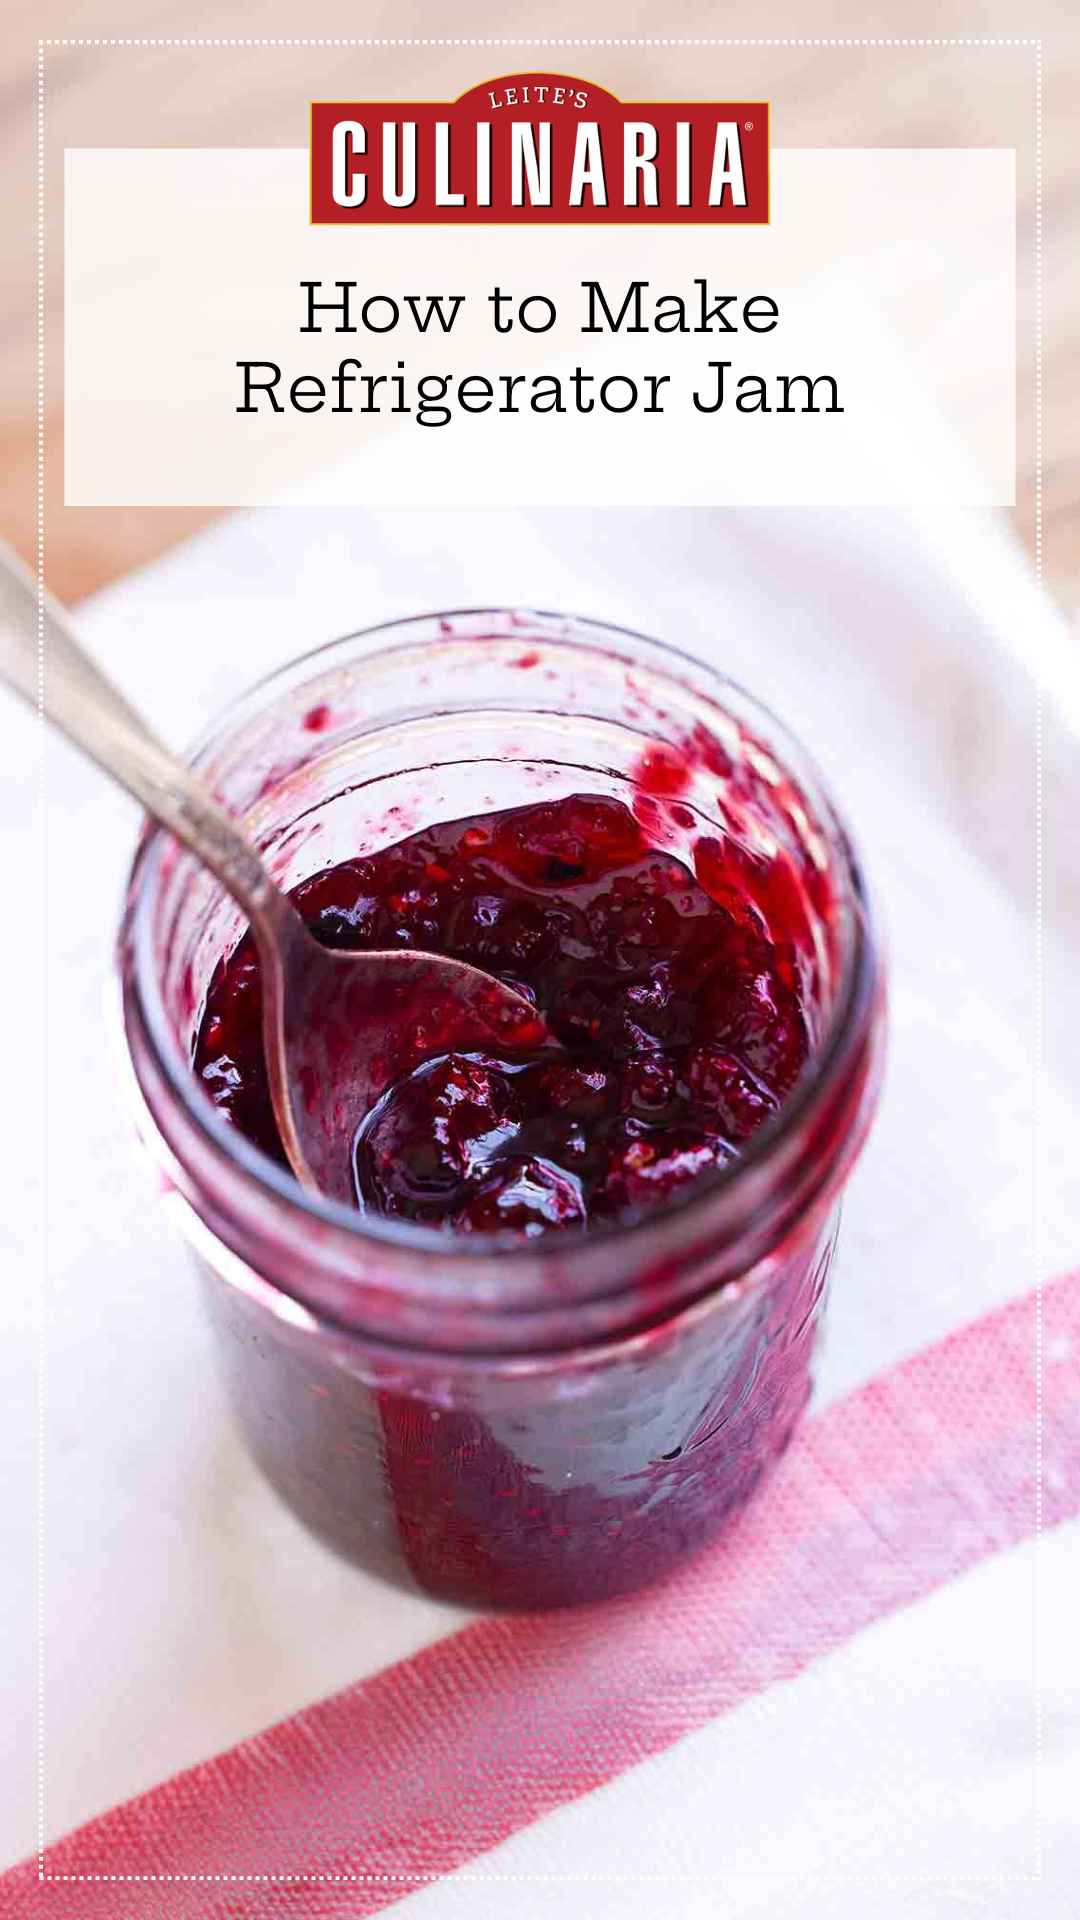 An open jar of homemade refrigerator jam with a spoon resting inside it.